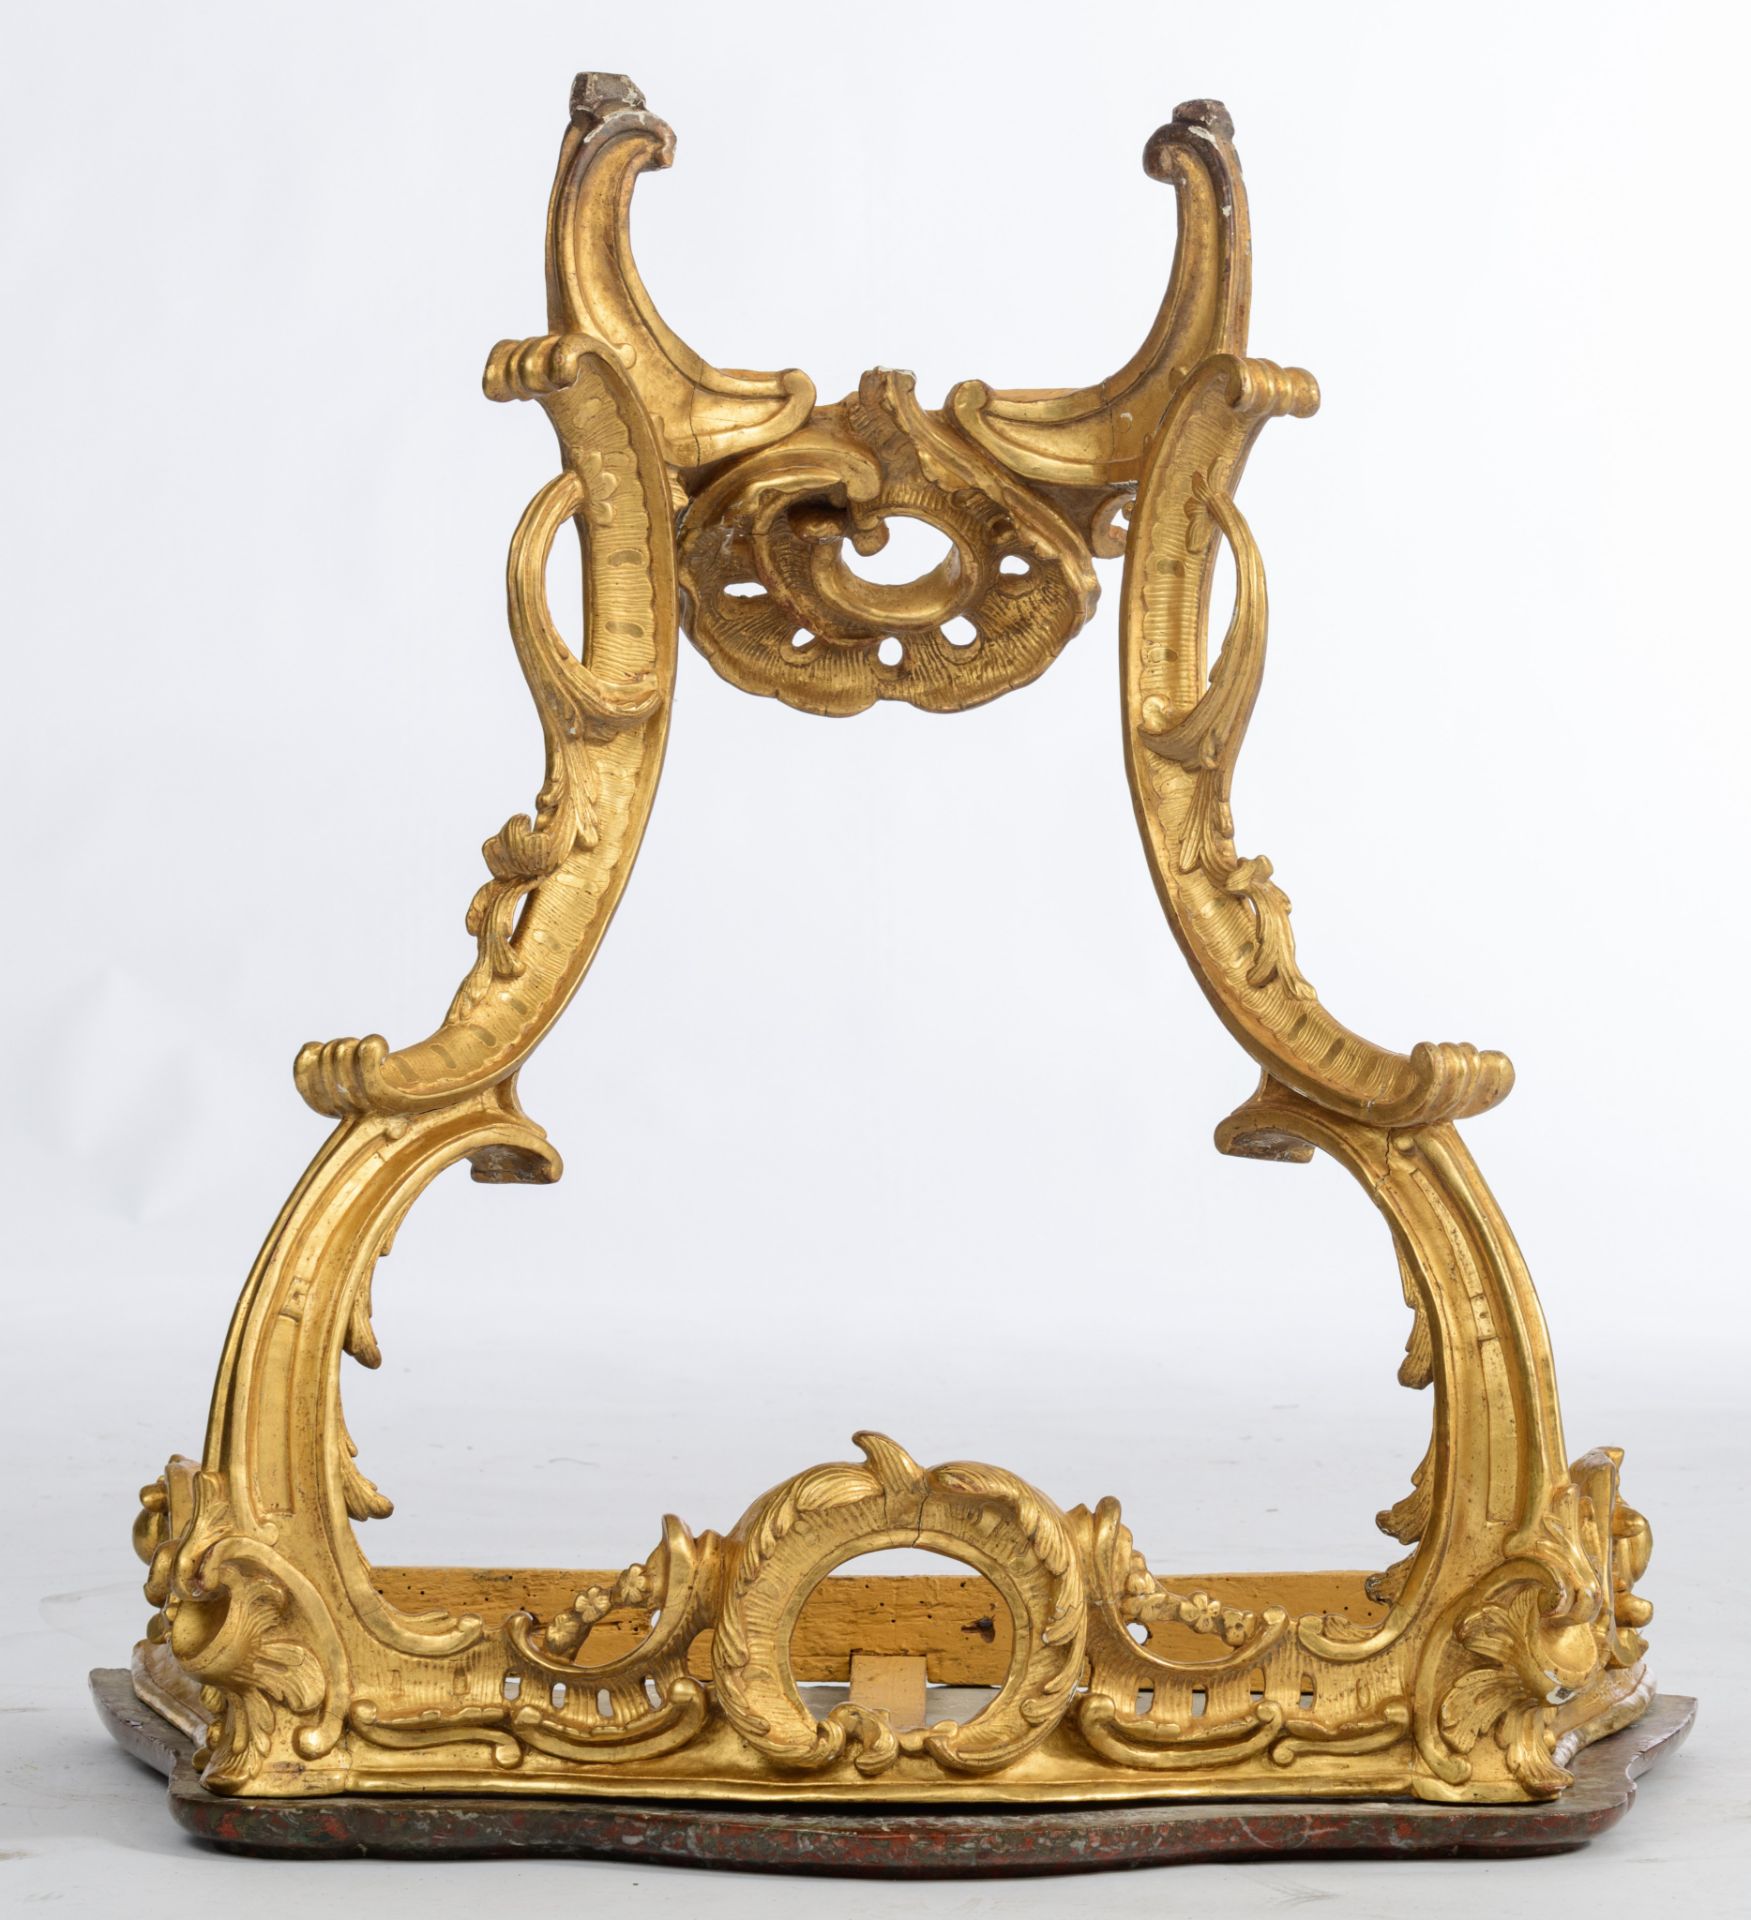 A richly carved giltwood Rococo console table, mid 18thC, H 83 - W 81,5 - D 48,5 cm - Image 2 of 11